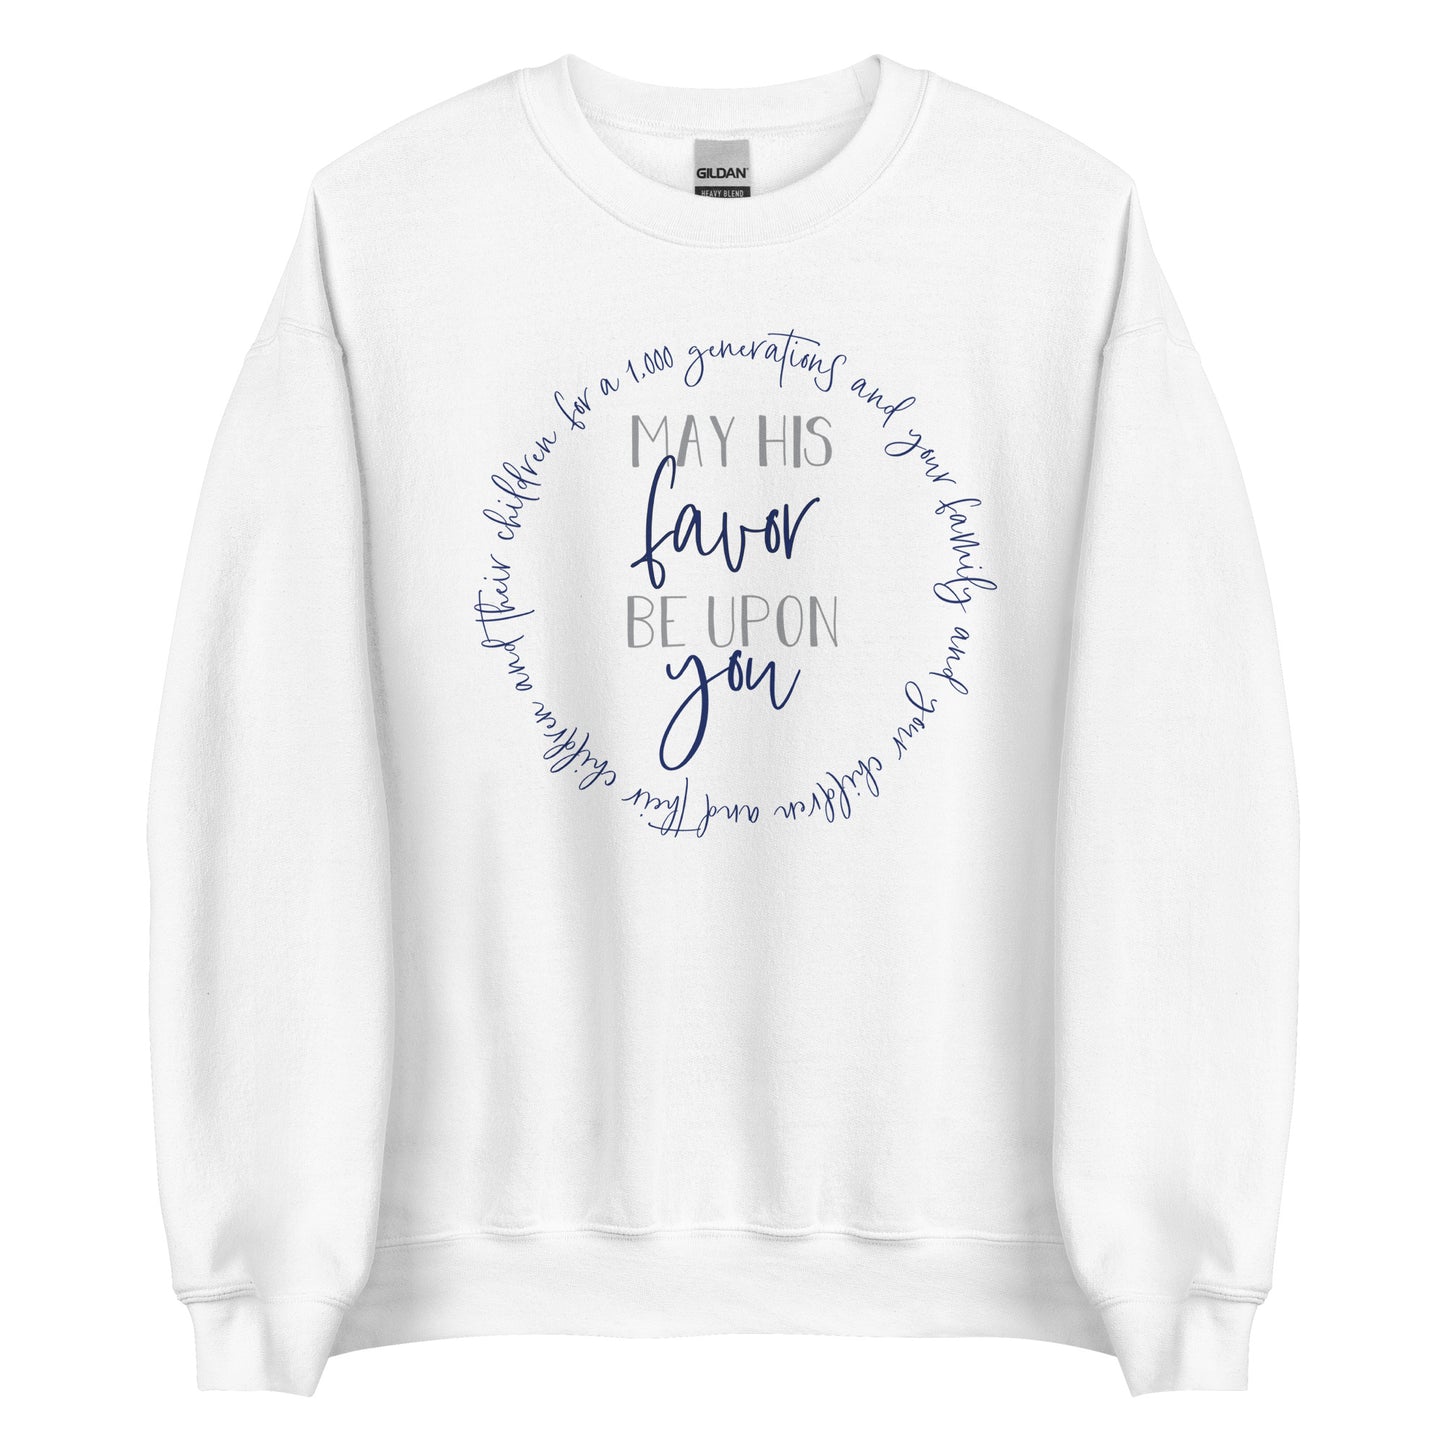 May His Favor Be Upon You family & children Numbers 6 The Blessing Christian aesthetic circle design printed on cozy white unisex crewneck shirt for women